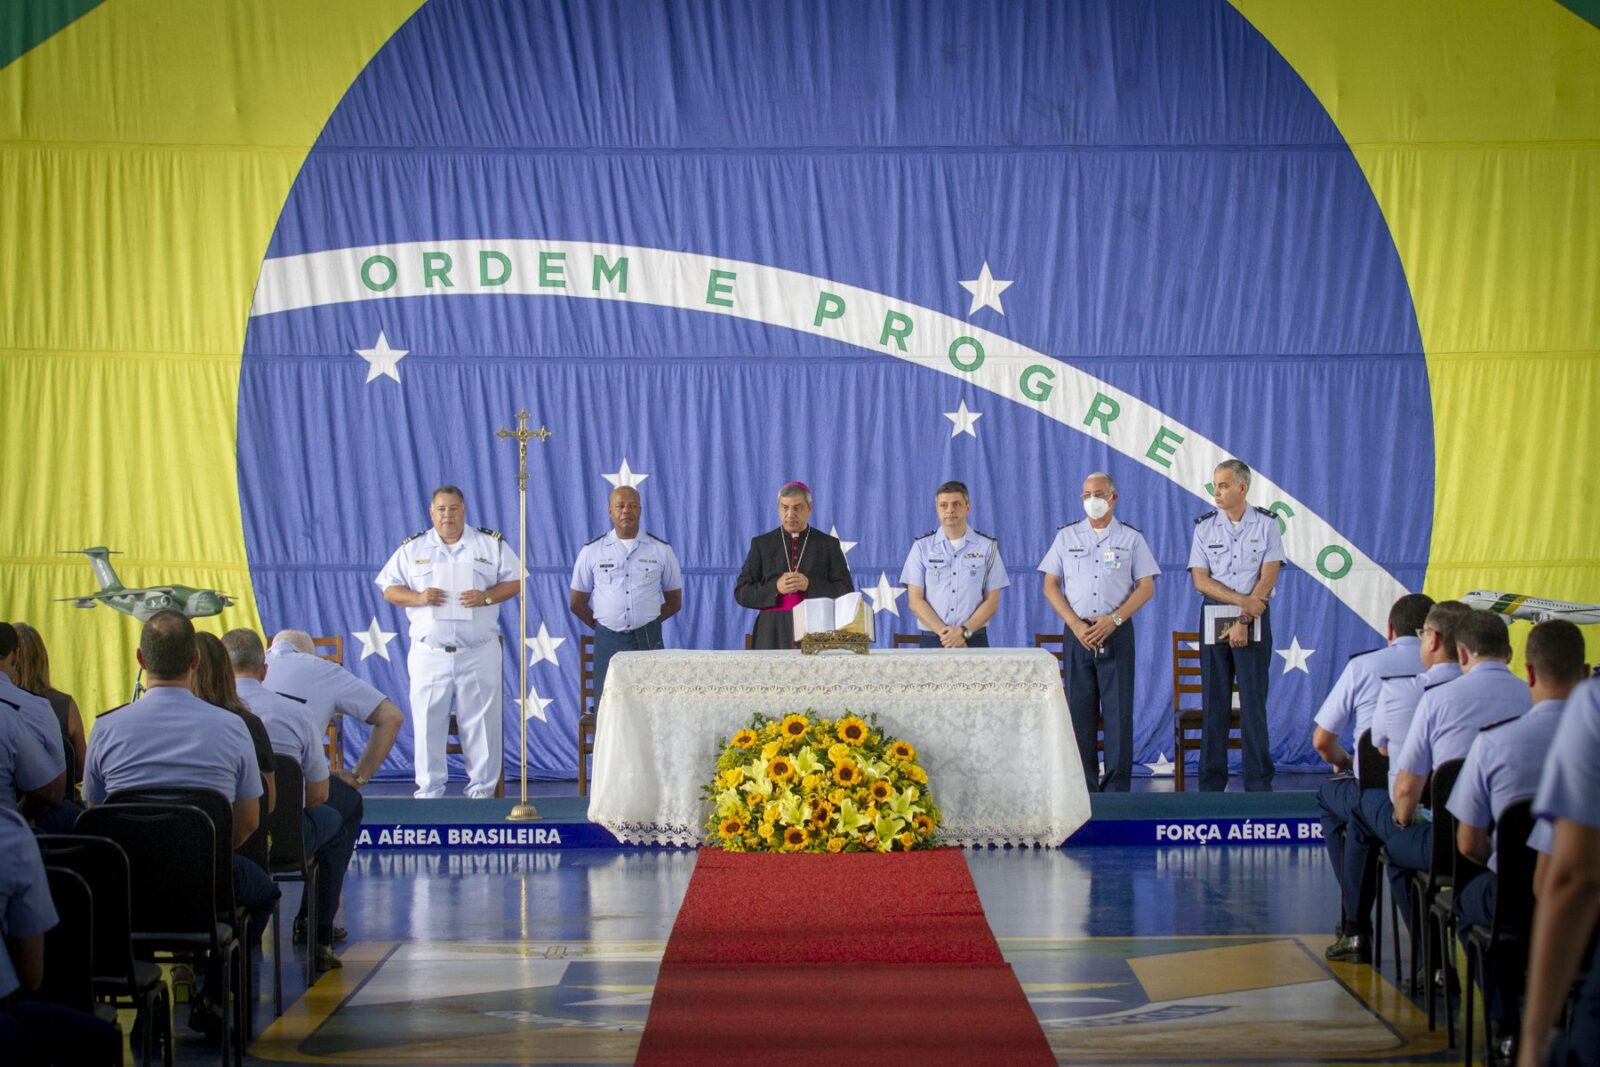 Inter-religious celebration marks the beginning of the Airman and FAB Day events